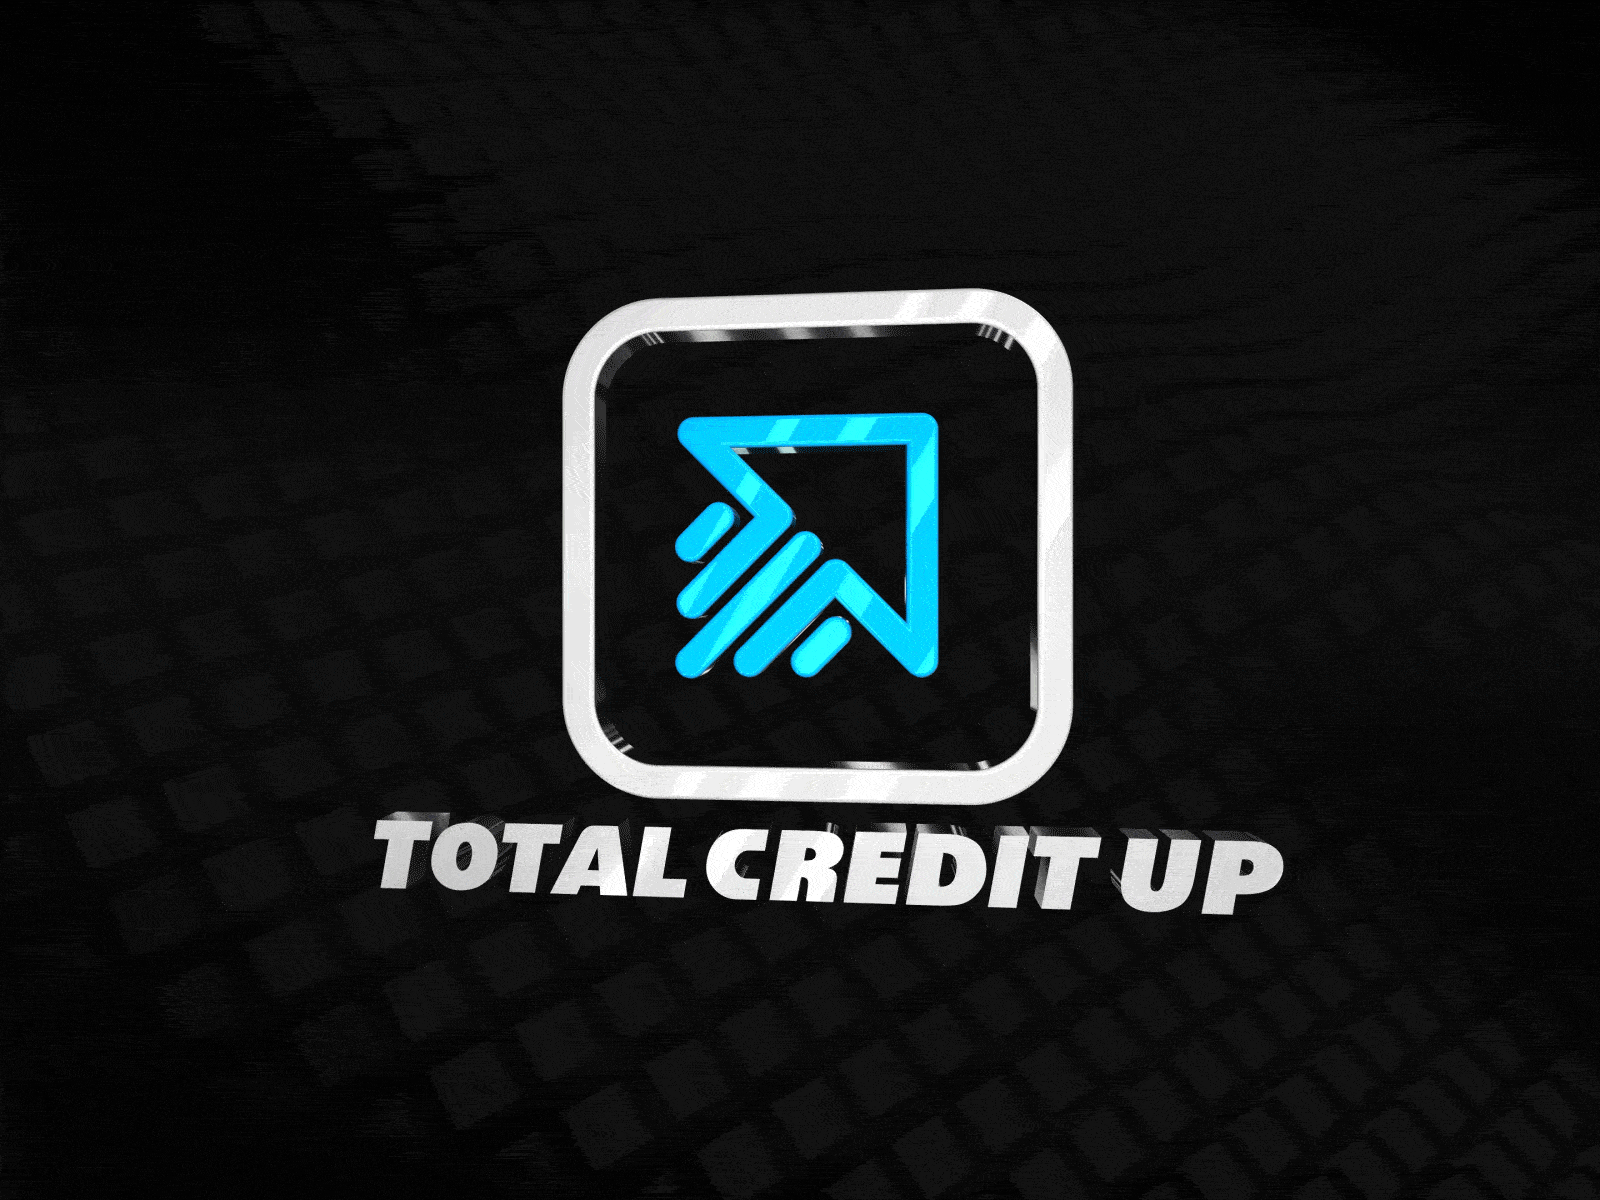 Logo Animation ▸TOTAL CREDIT UP ® 3D ID